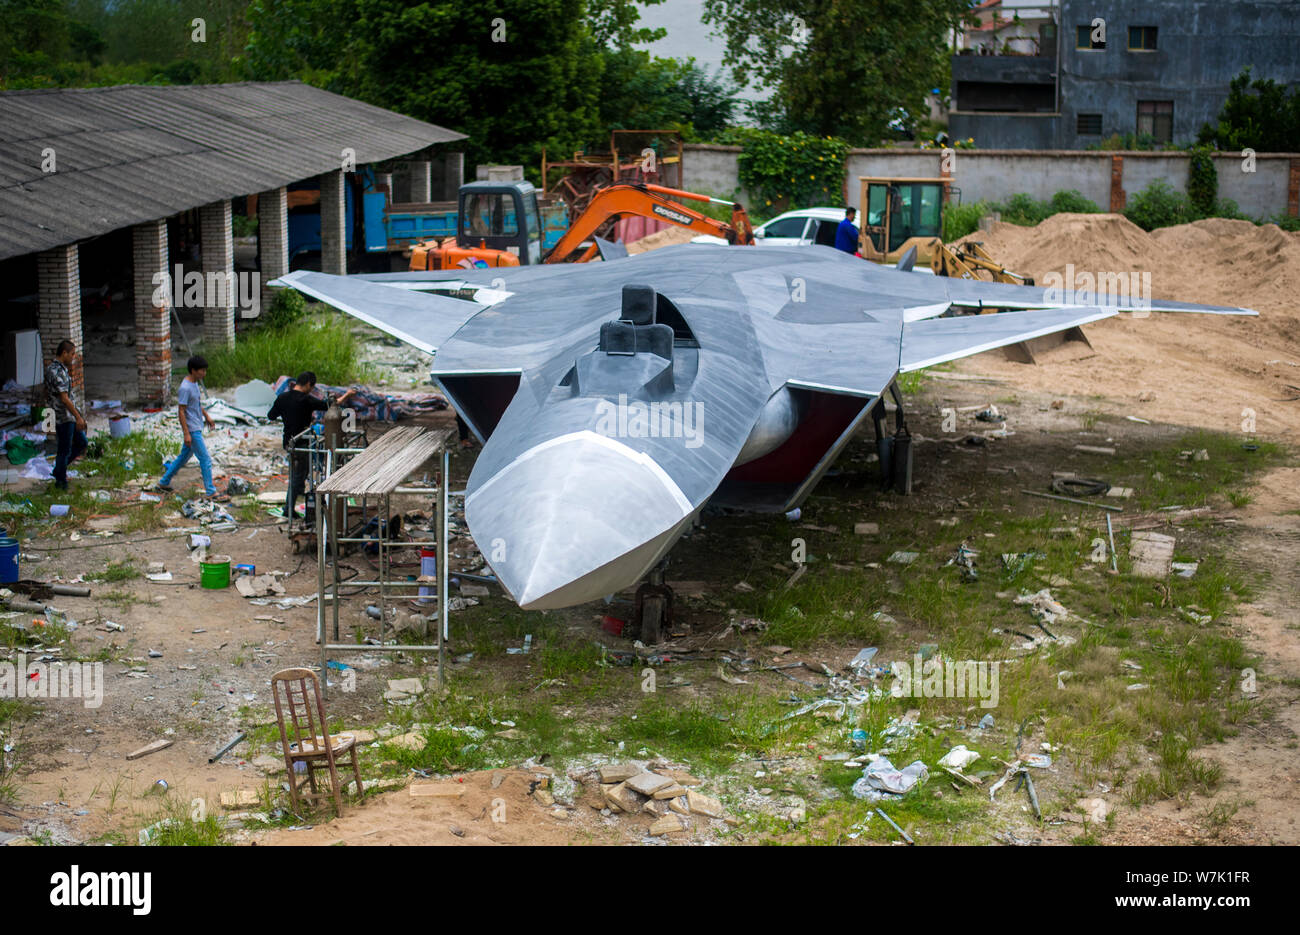 stealth fighters of the world